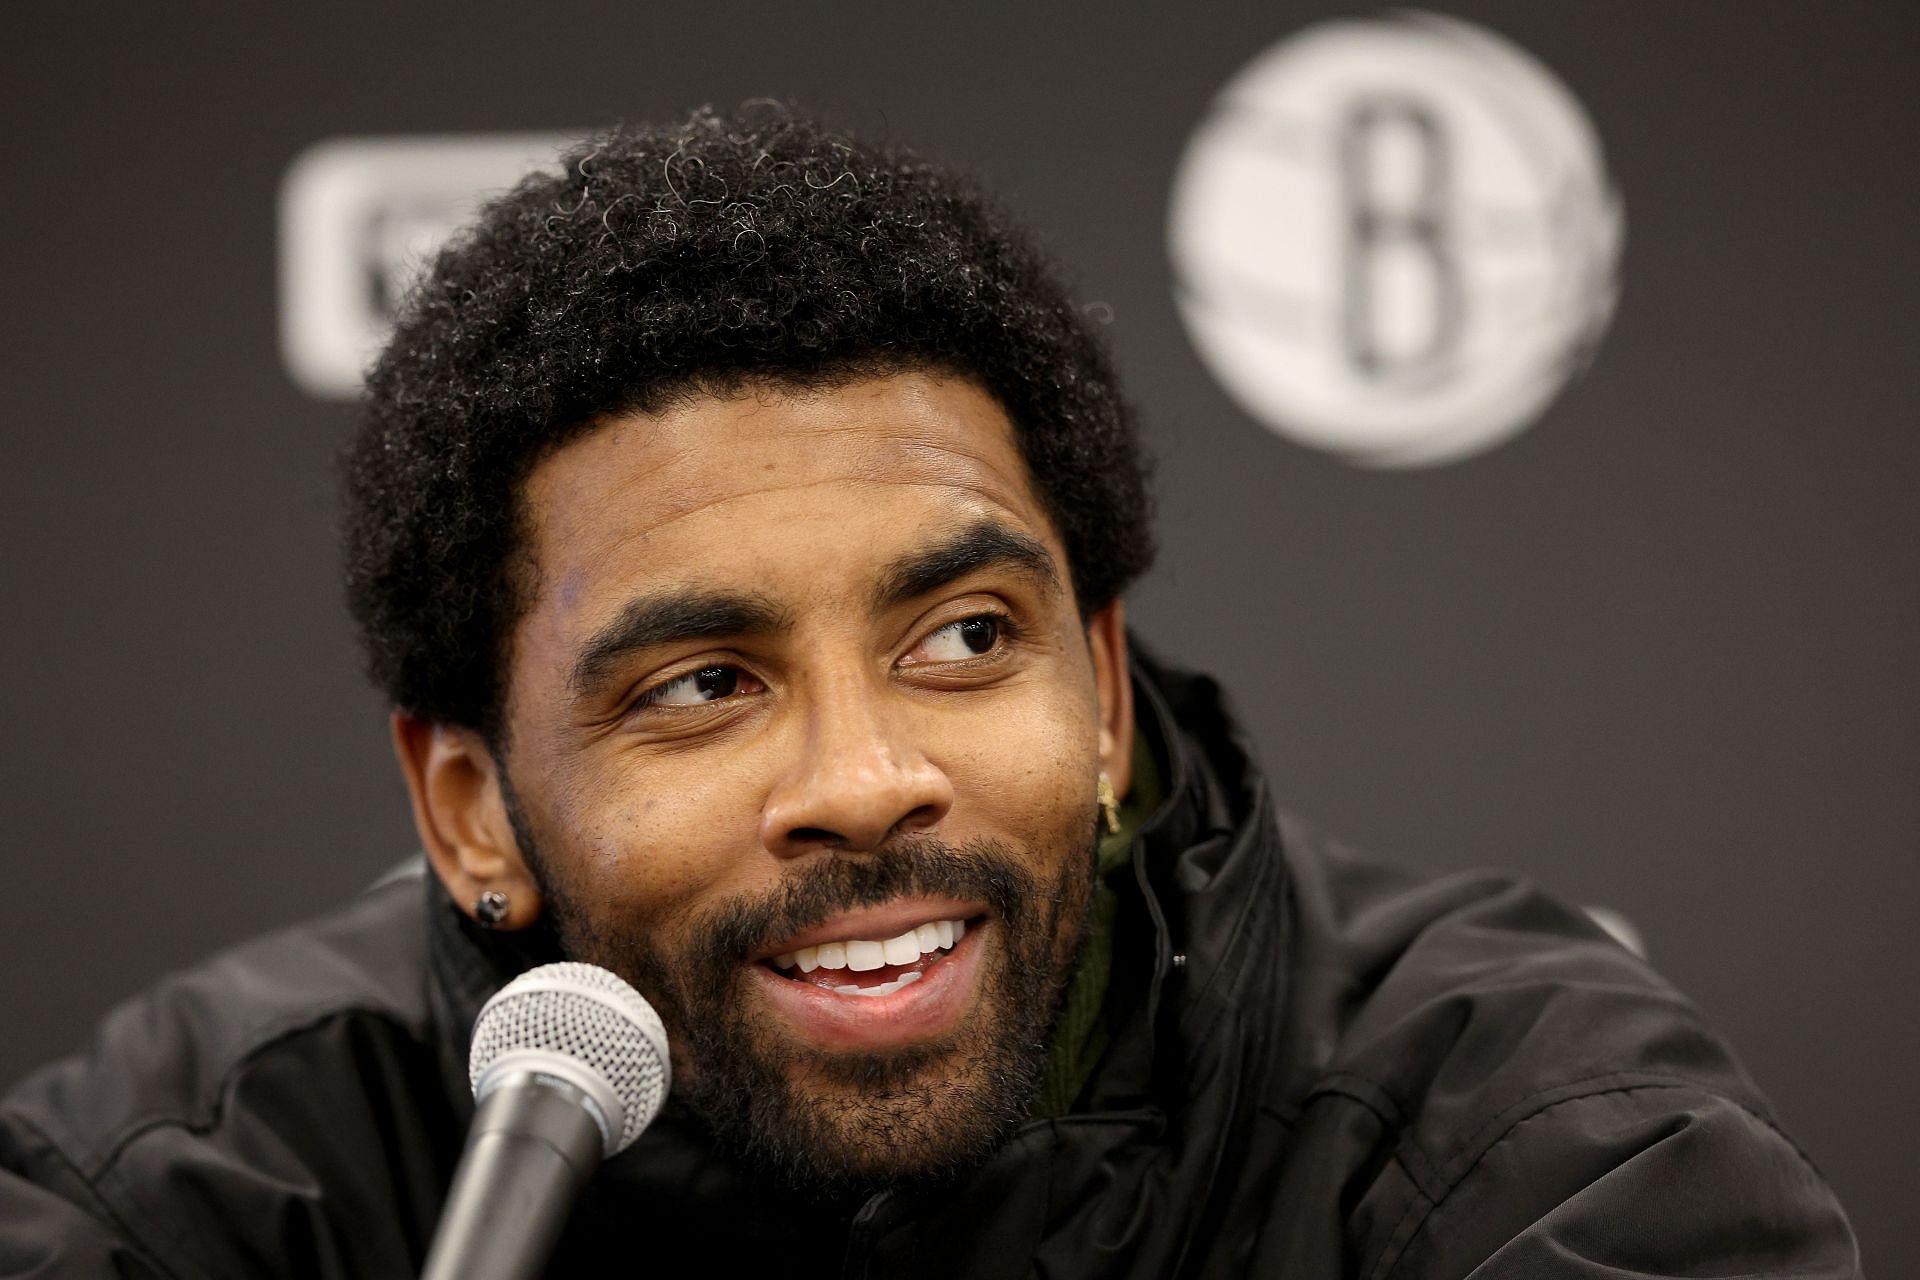 Kyrie Irving #11of the Brooklyn Nets talks to the media following the game against the Indiana Pacers